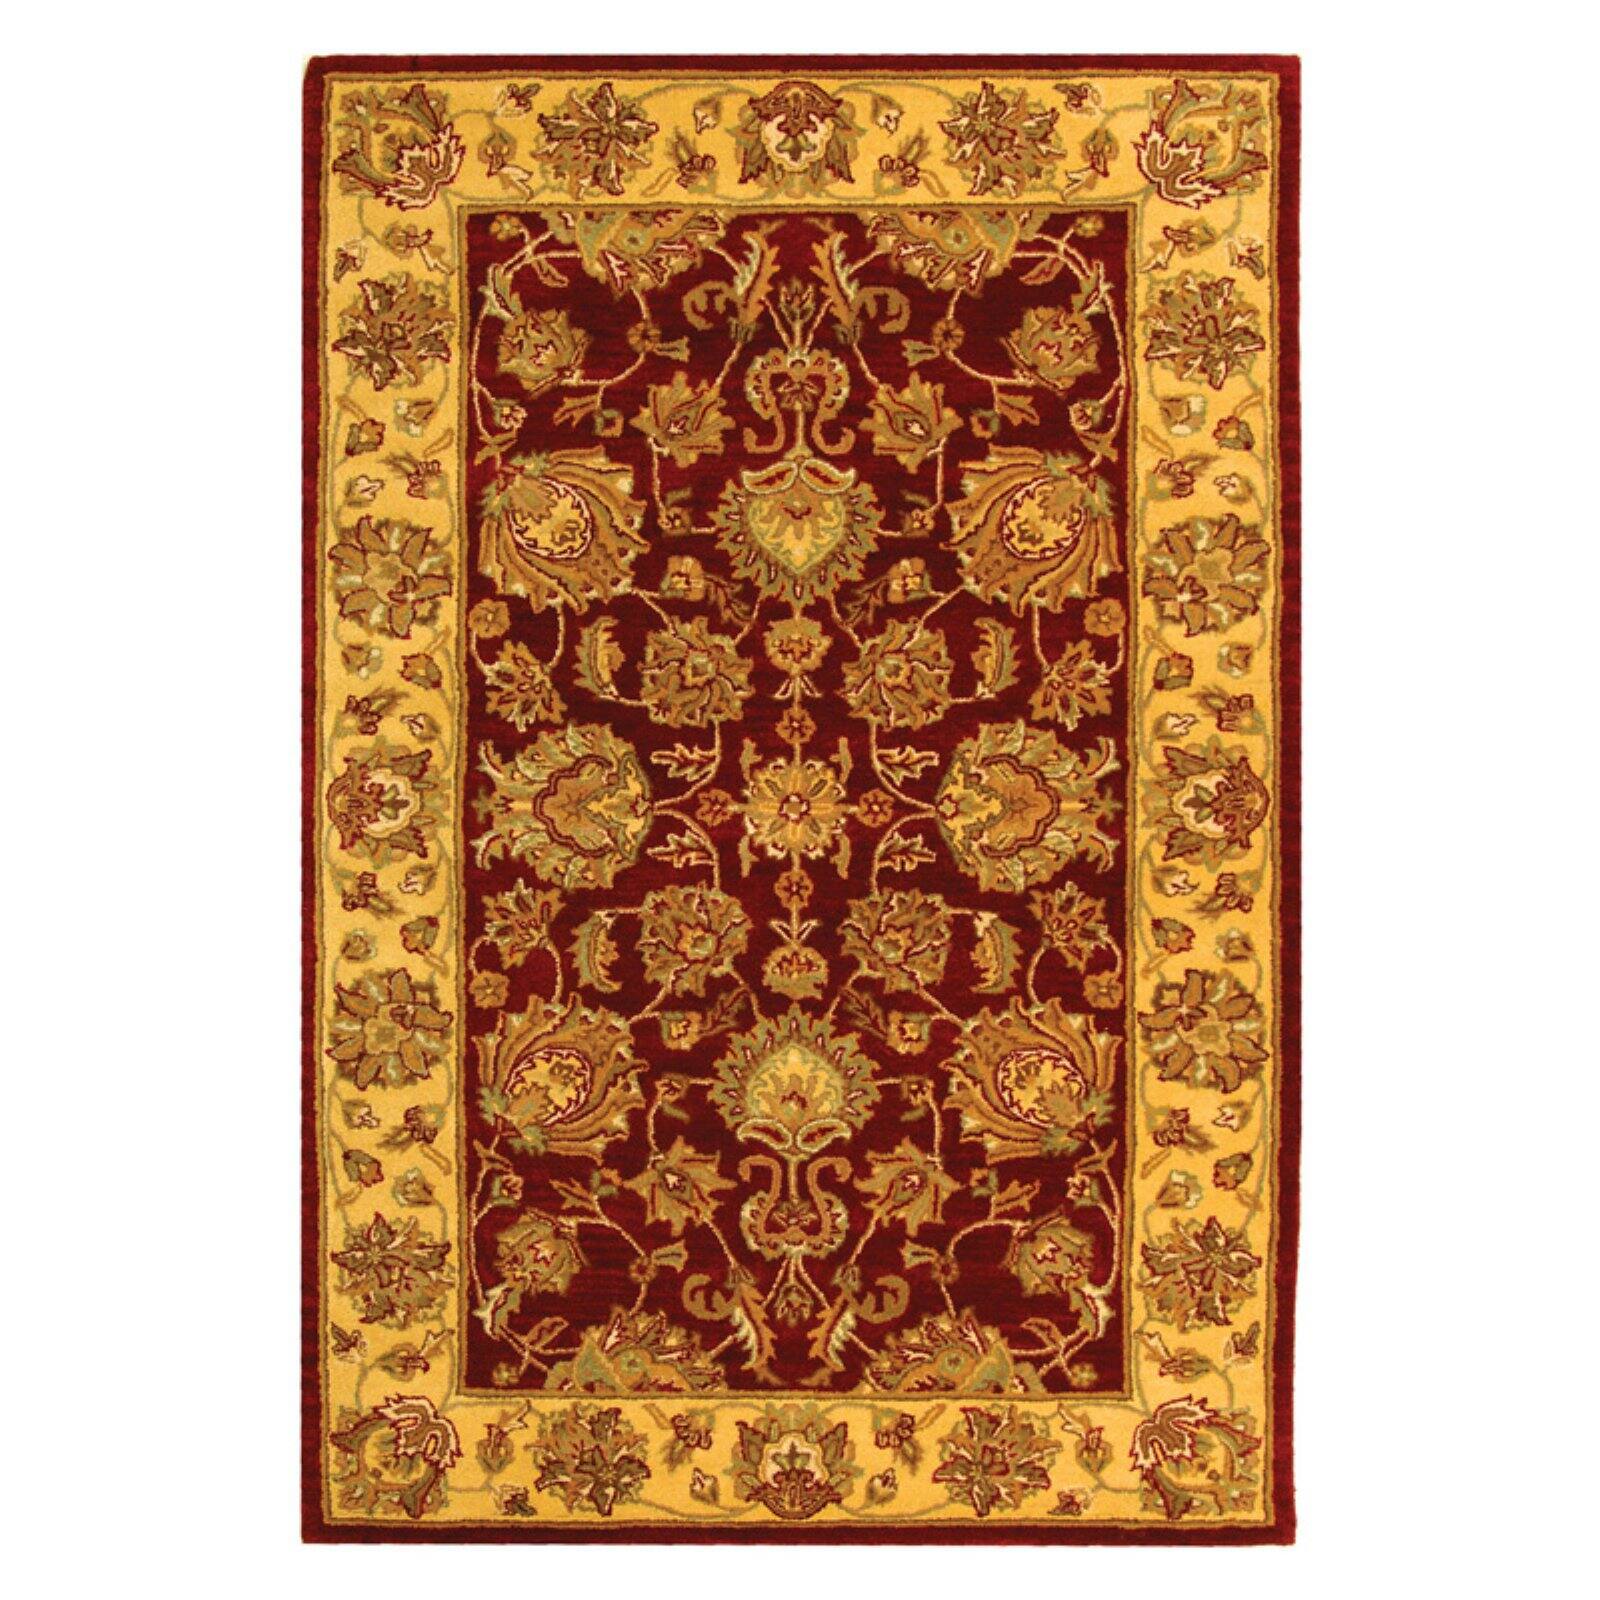 SAFAVIEH Heritage Regis Traditional Wool Area Rug, Red/Gold, 7'6" x 9'6" - image 4 of 9